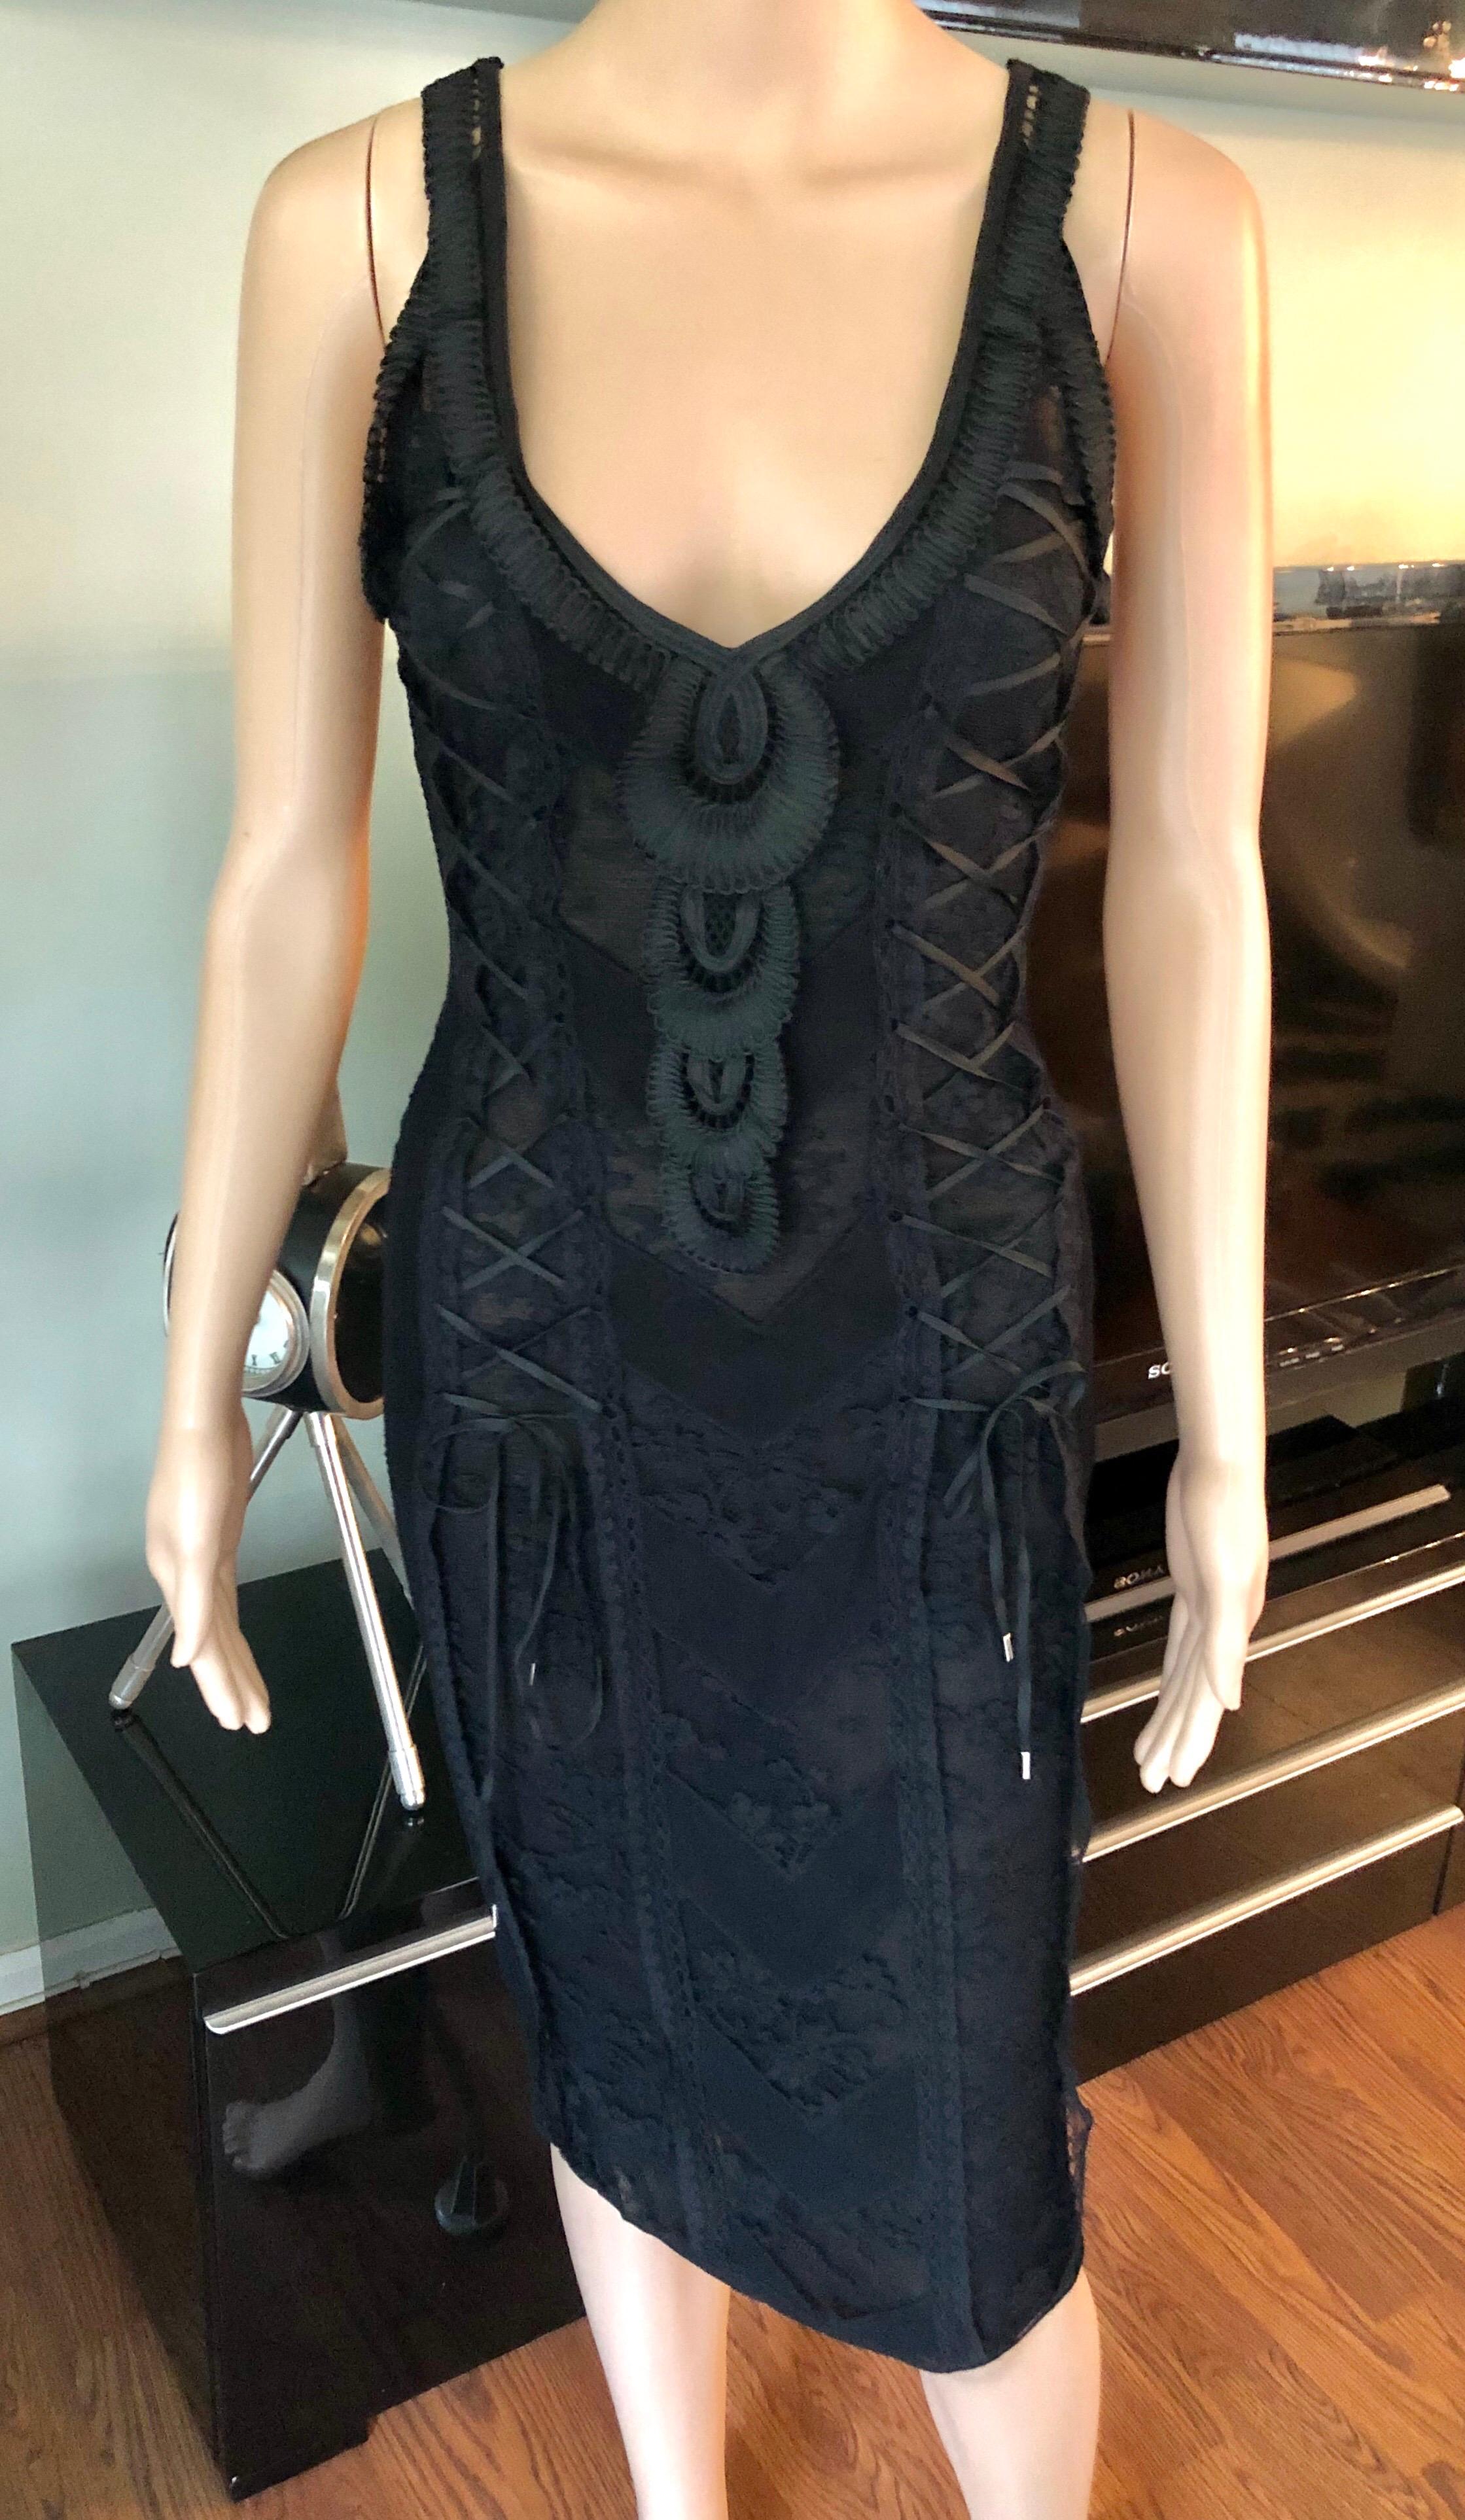 Christian Dior by John Galliano S/S 2006 Sheer Lace Trimmed Corset Knit Black Dress FR 36

Christian Dior midi dress featuring lace and embroidered trim throughout, V-neck and corset tie accents at front.
